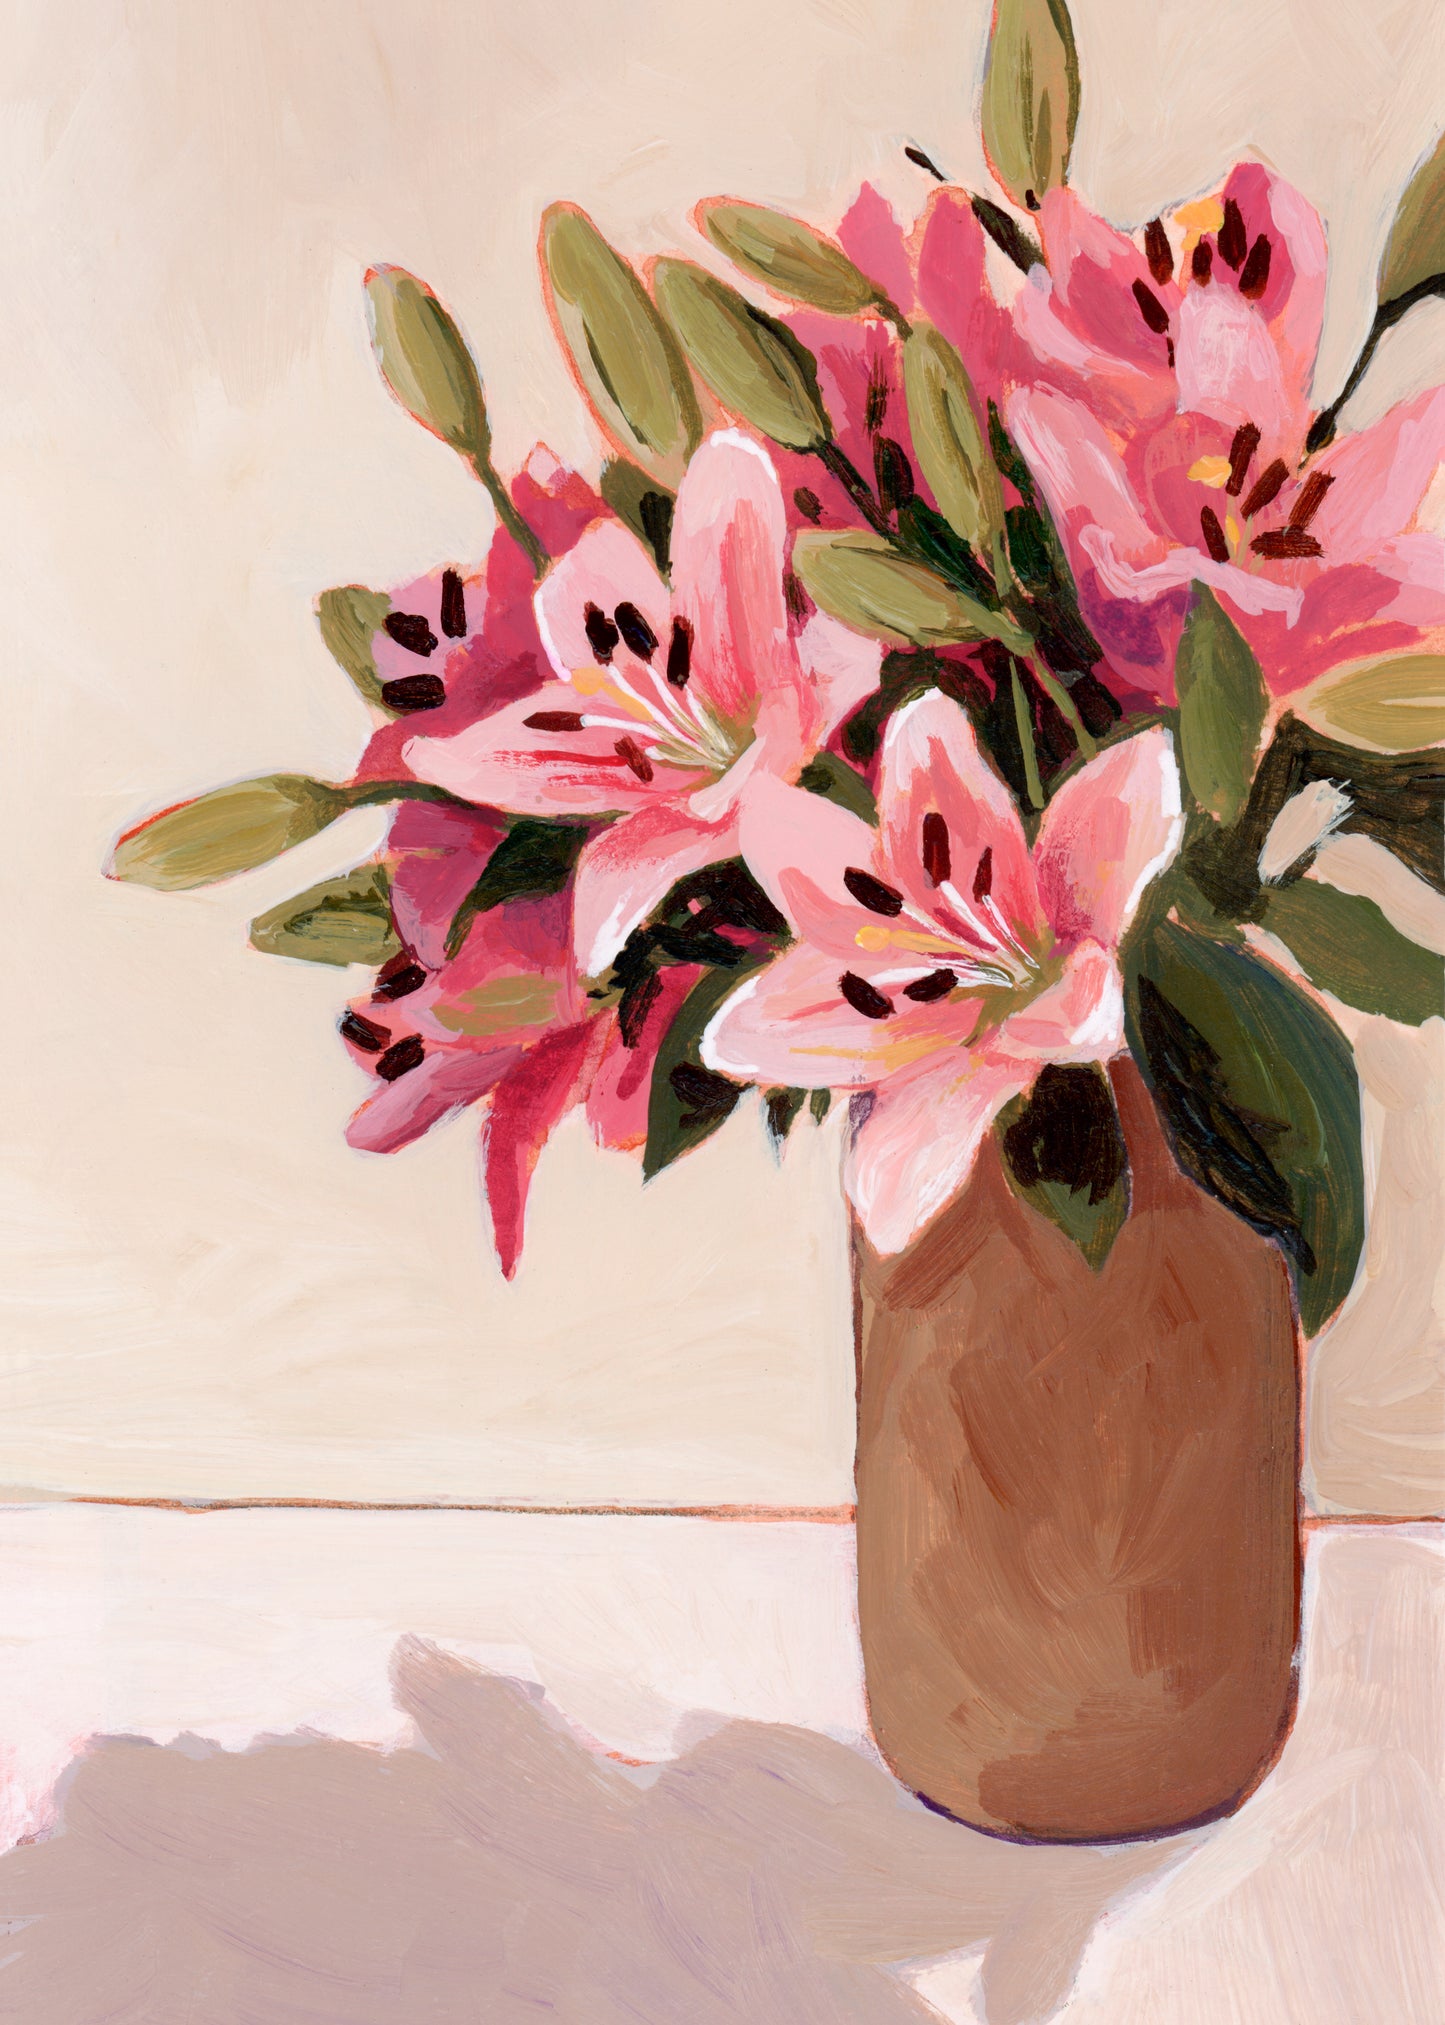 'Consider The Lilies' Print